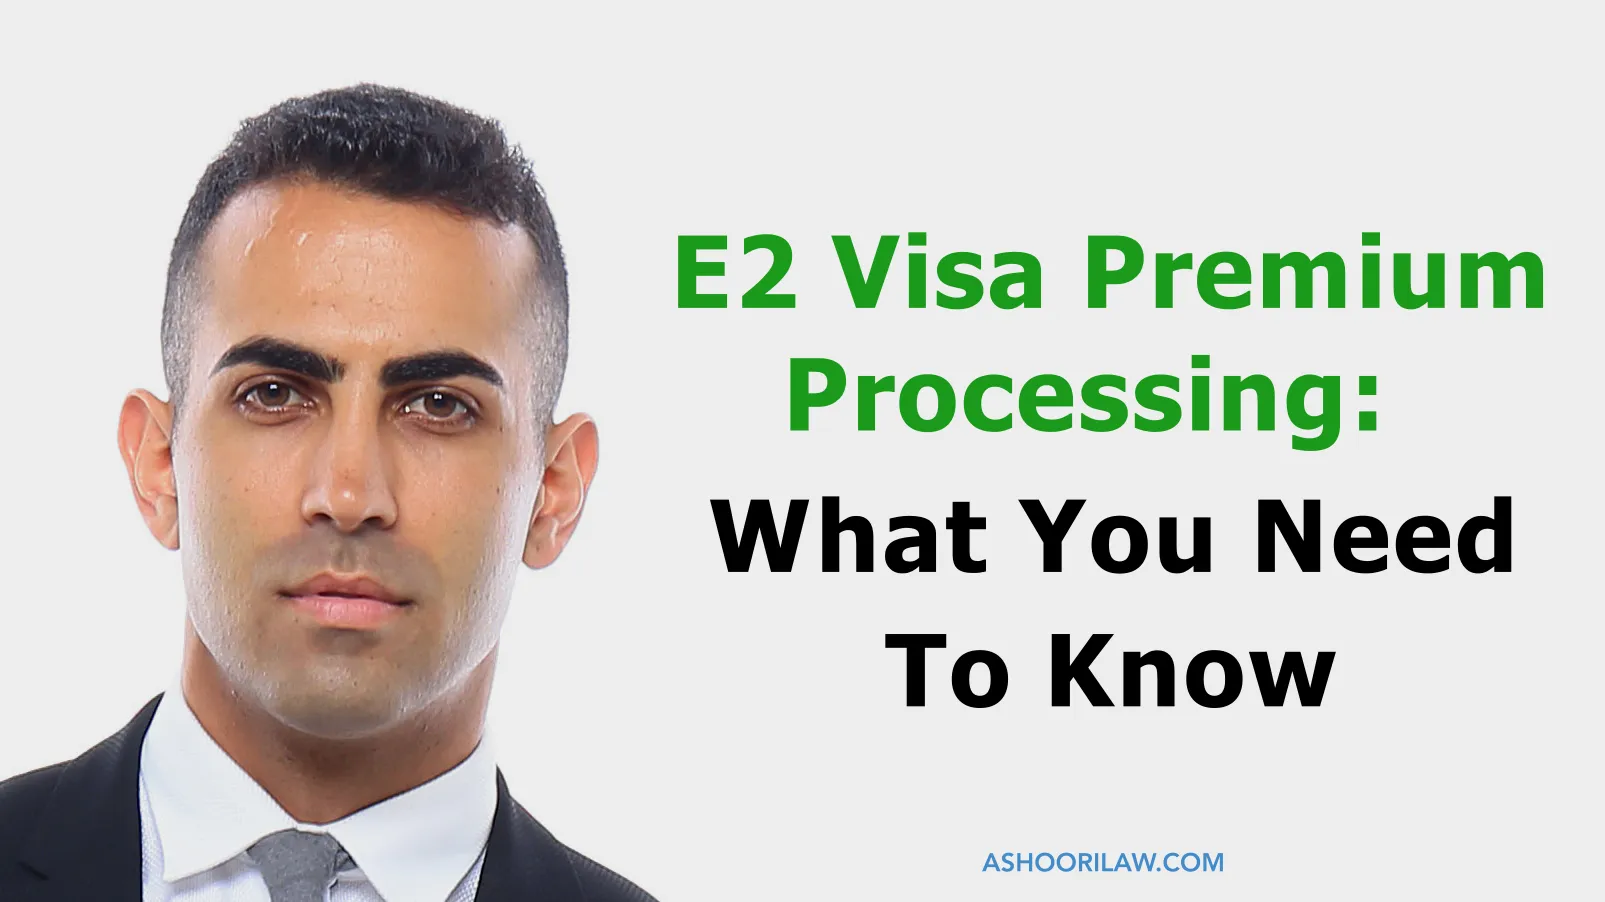 E2 Visa Premium Processing - What You Need To Know